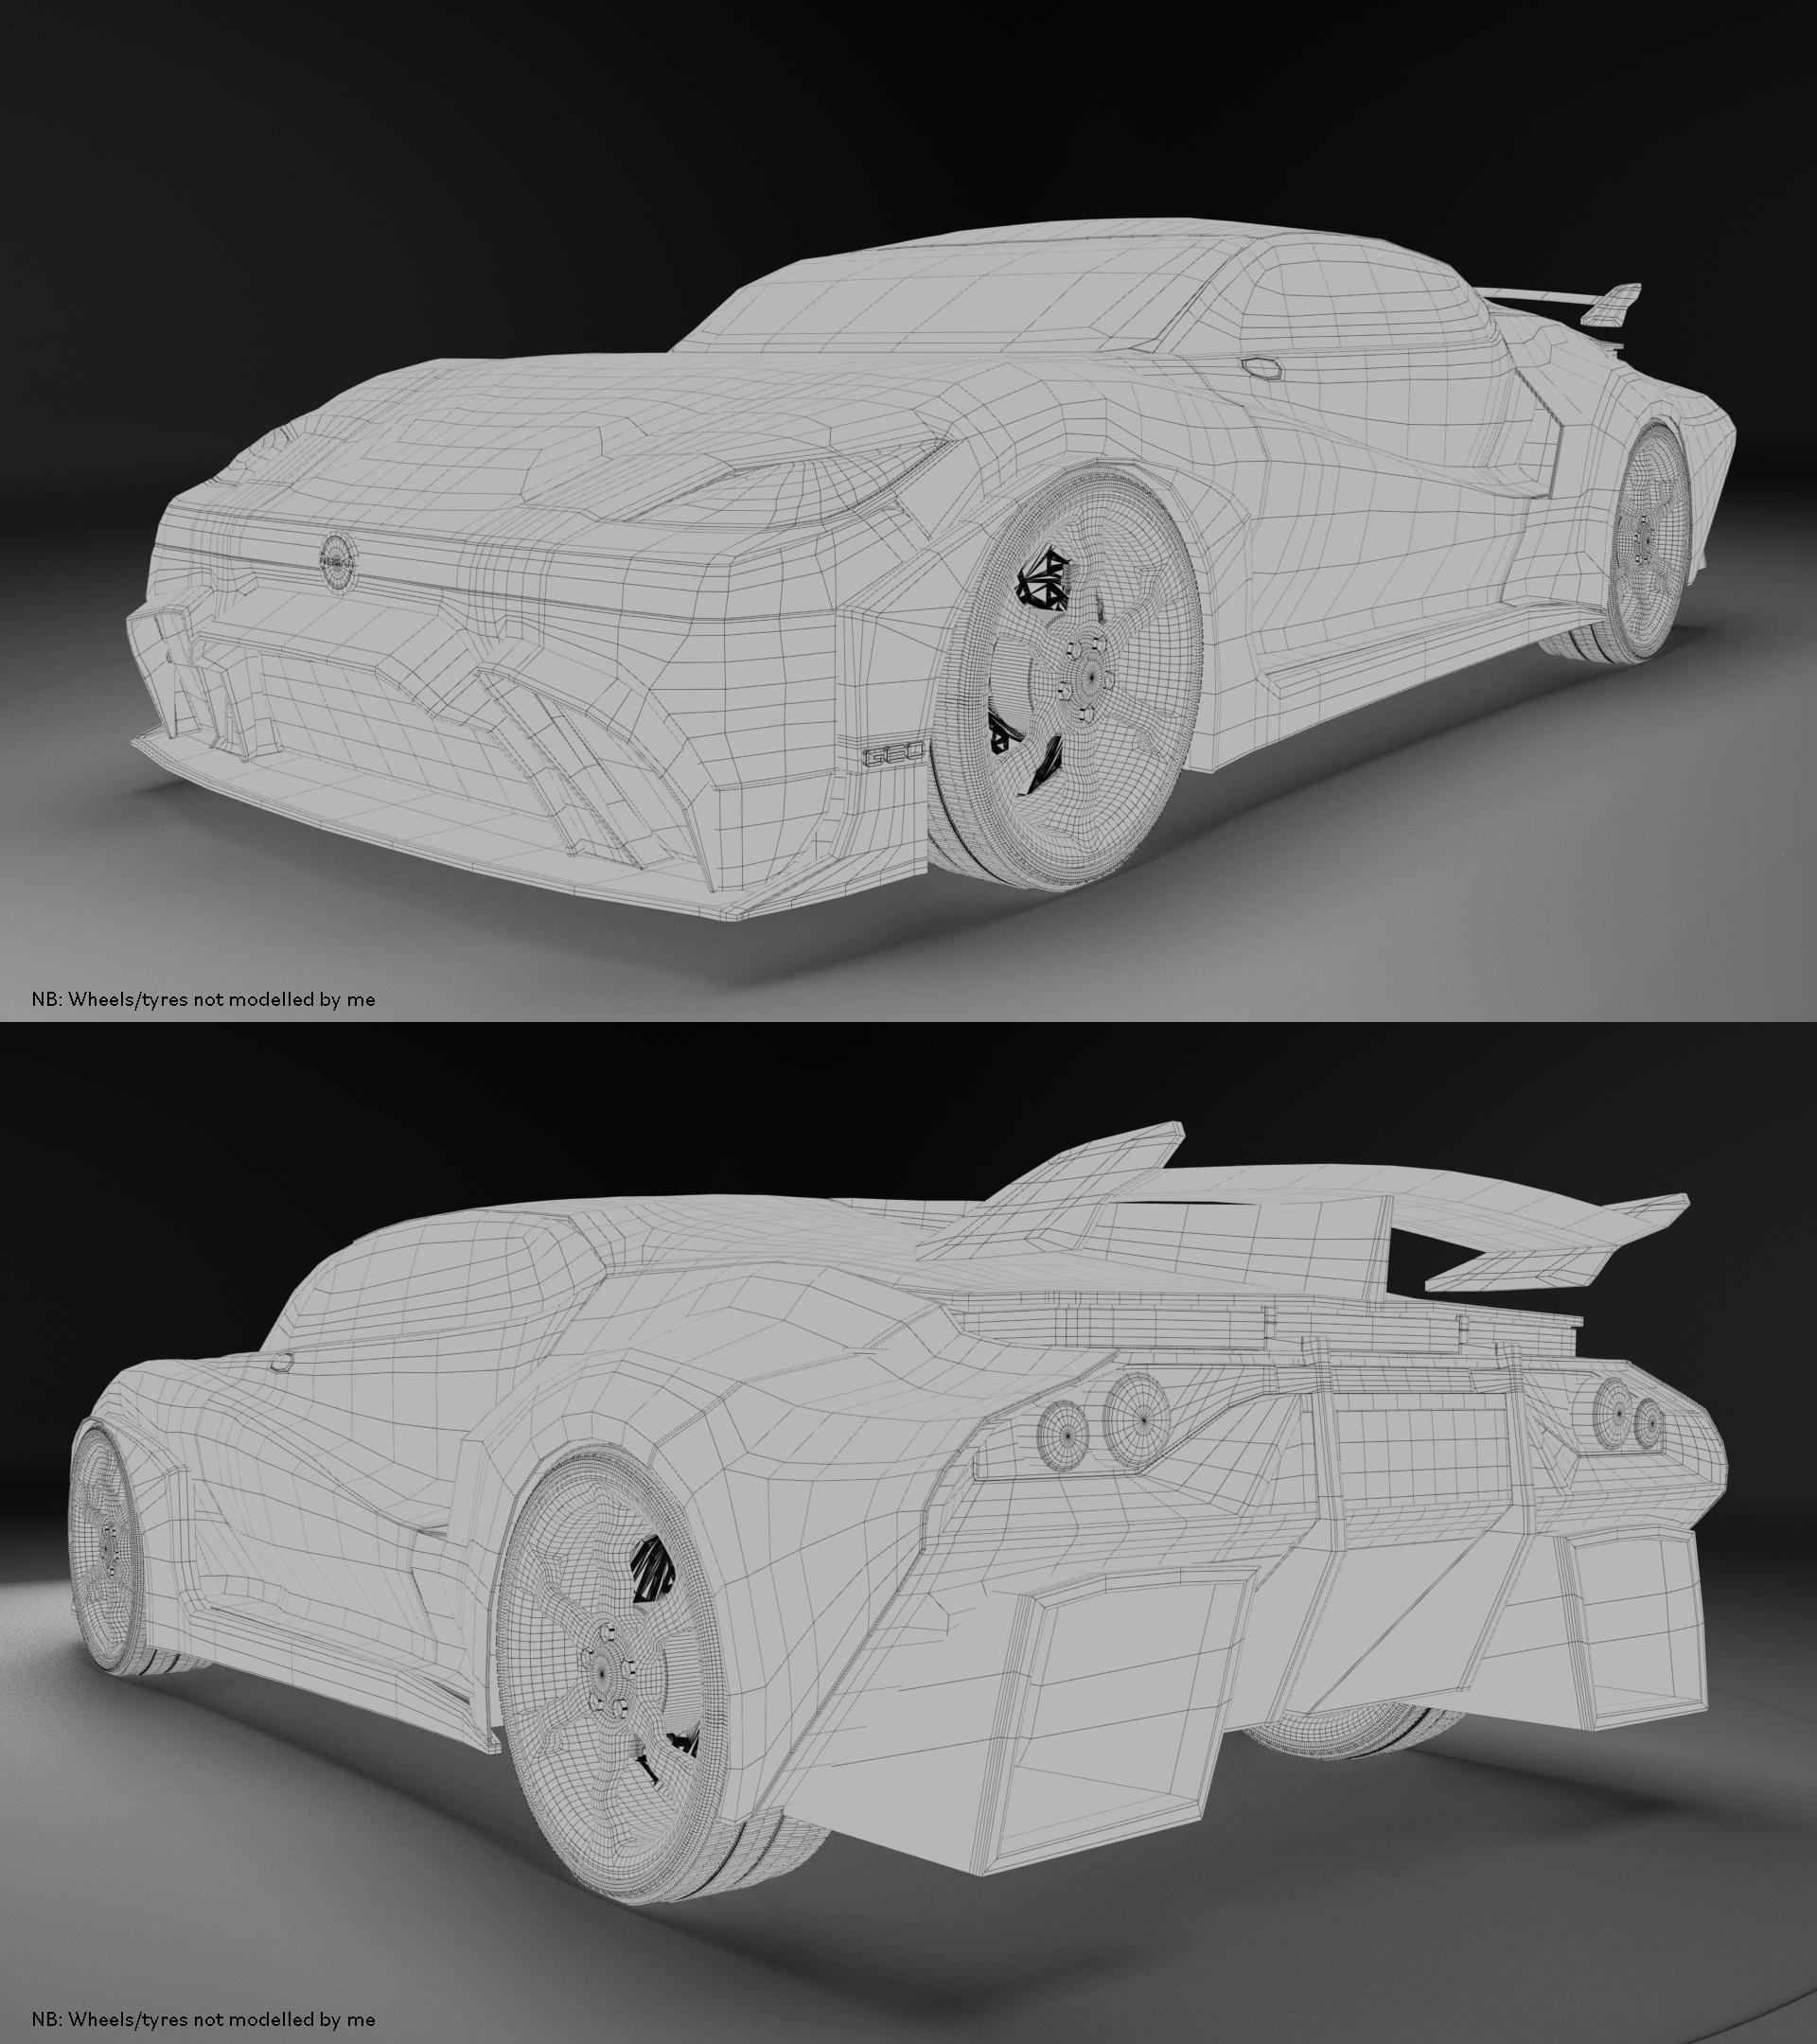 BA Visual effects work by Emily Woodhead, showing the wireframe model mesh of a sporty, modern supercar 3D model.